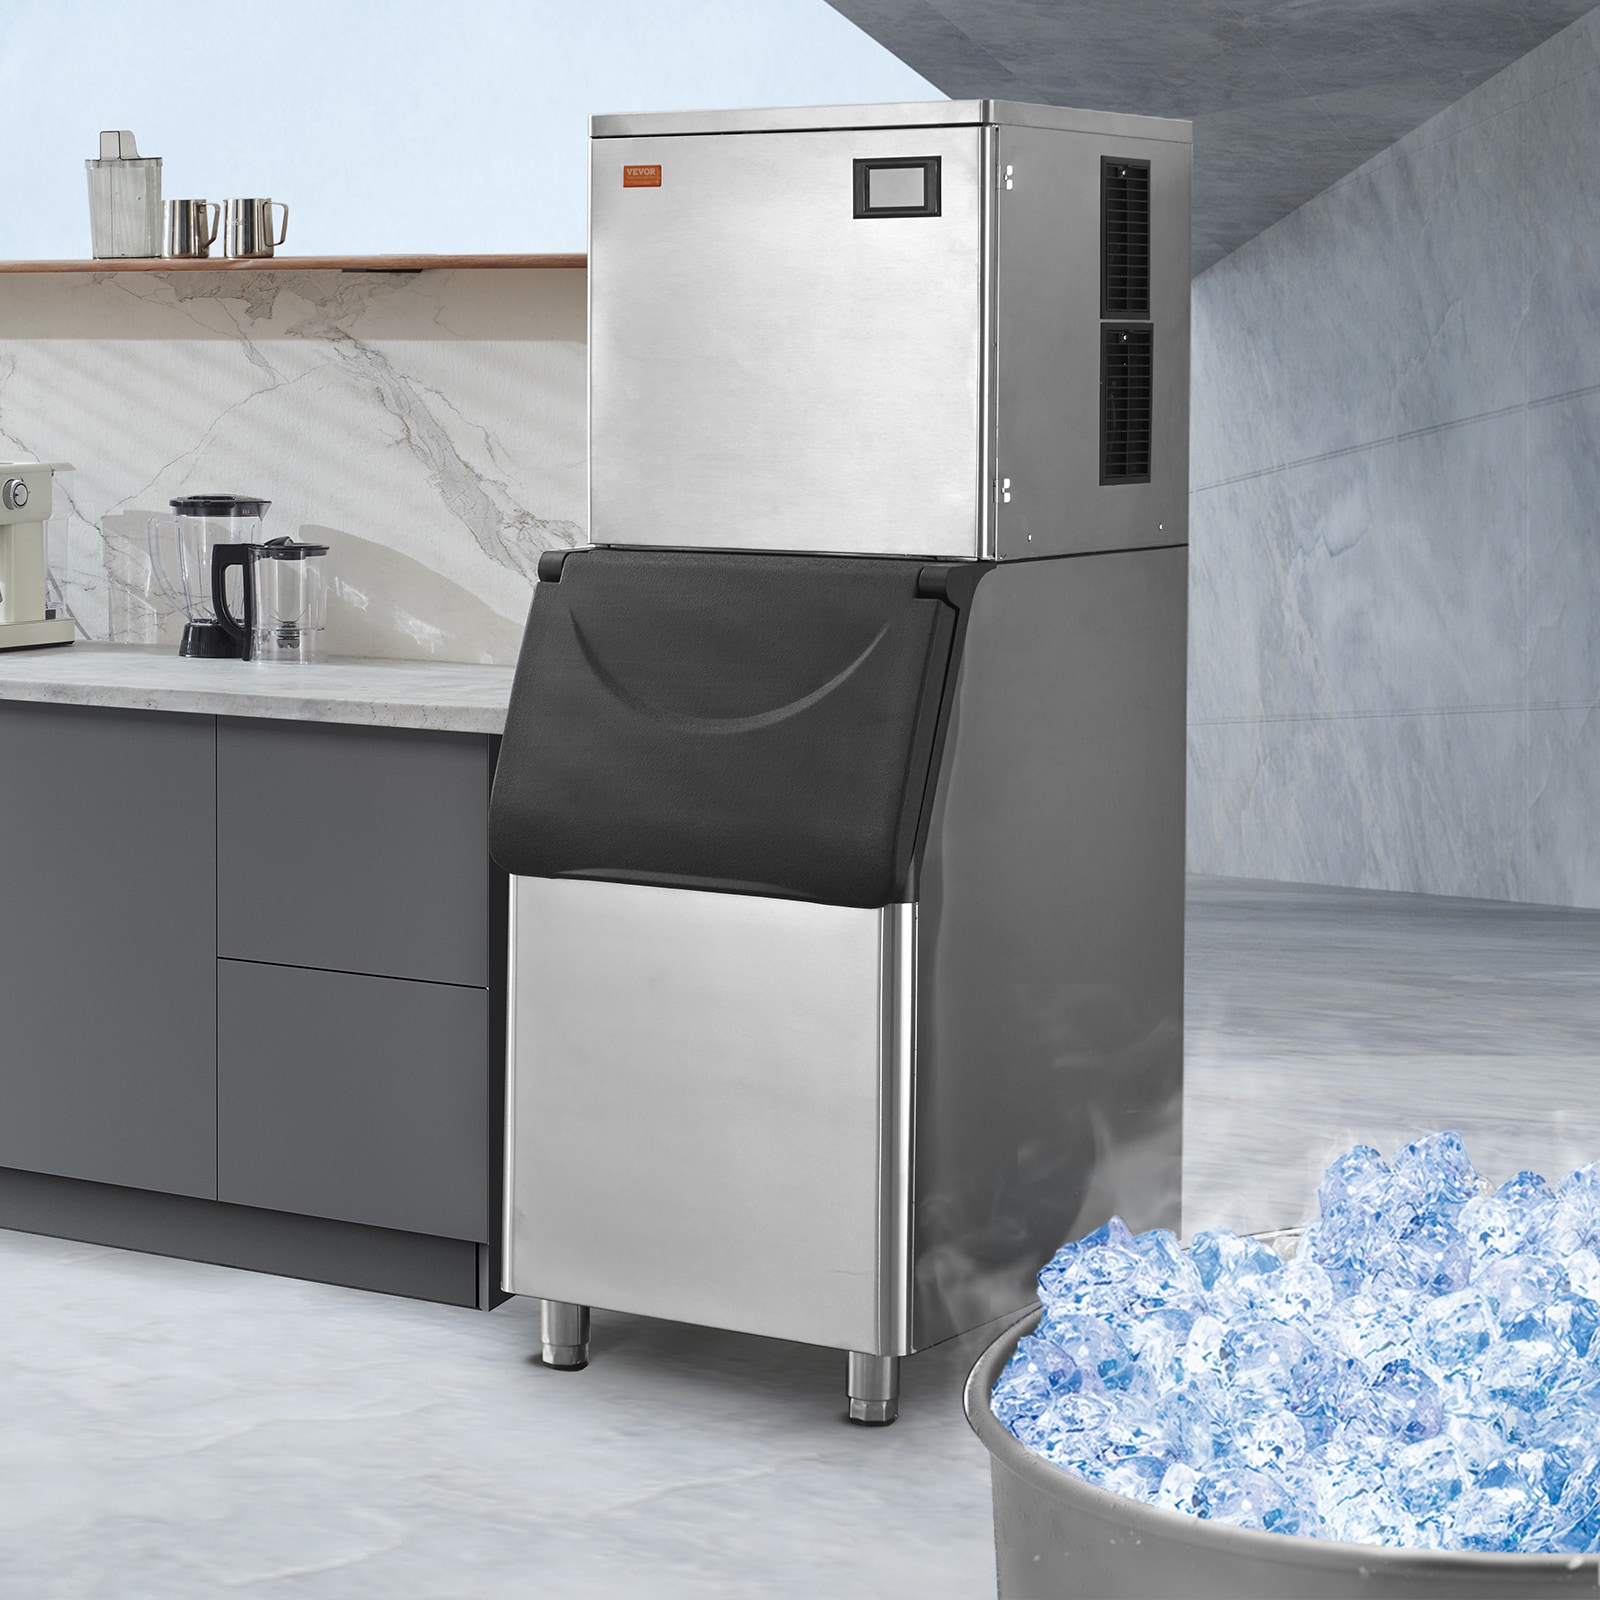 Nugget Ice Maker Machine - Nugget Ice Maker Countertop with Ice Scoop and  Basket, Includes Rear-Mounted Hose Drainage, Compact, - AliExpress